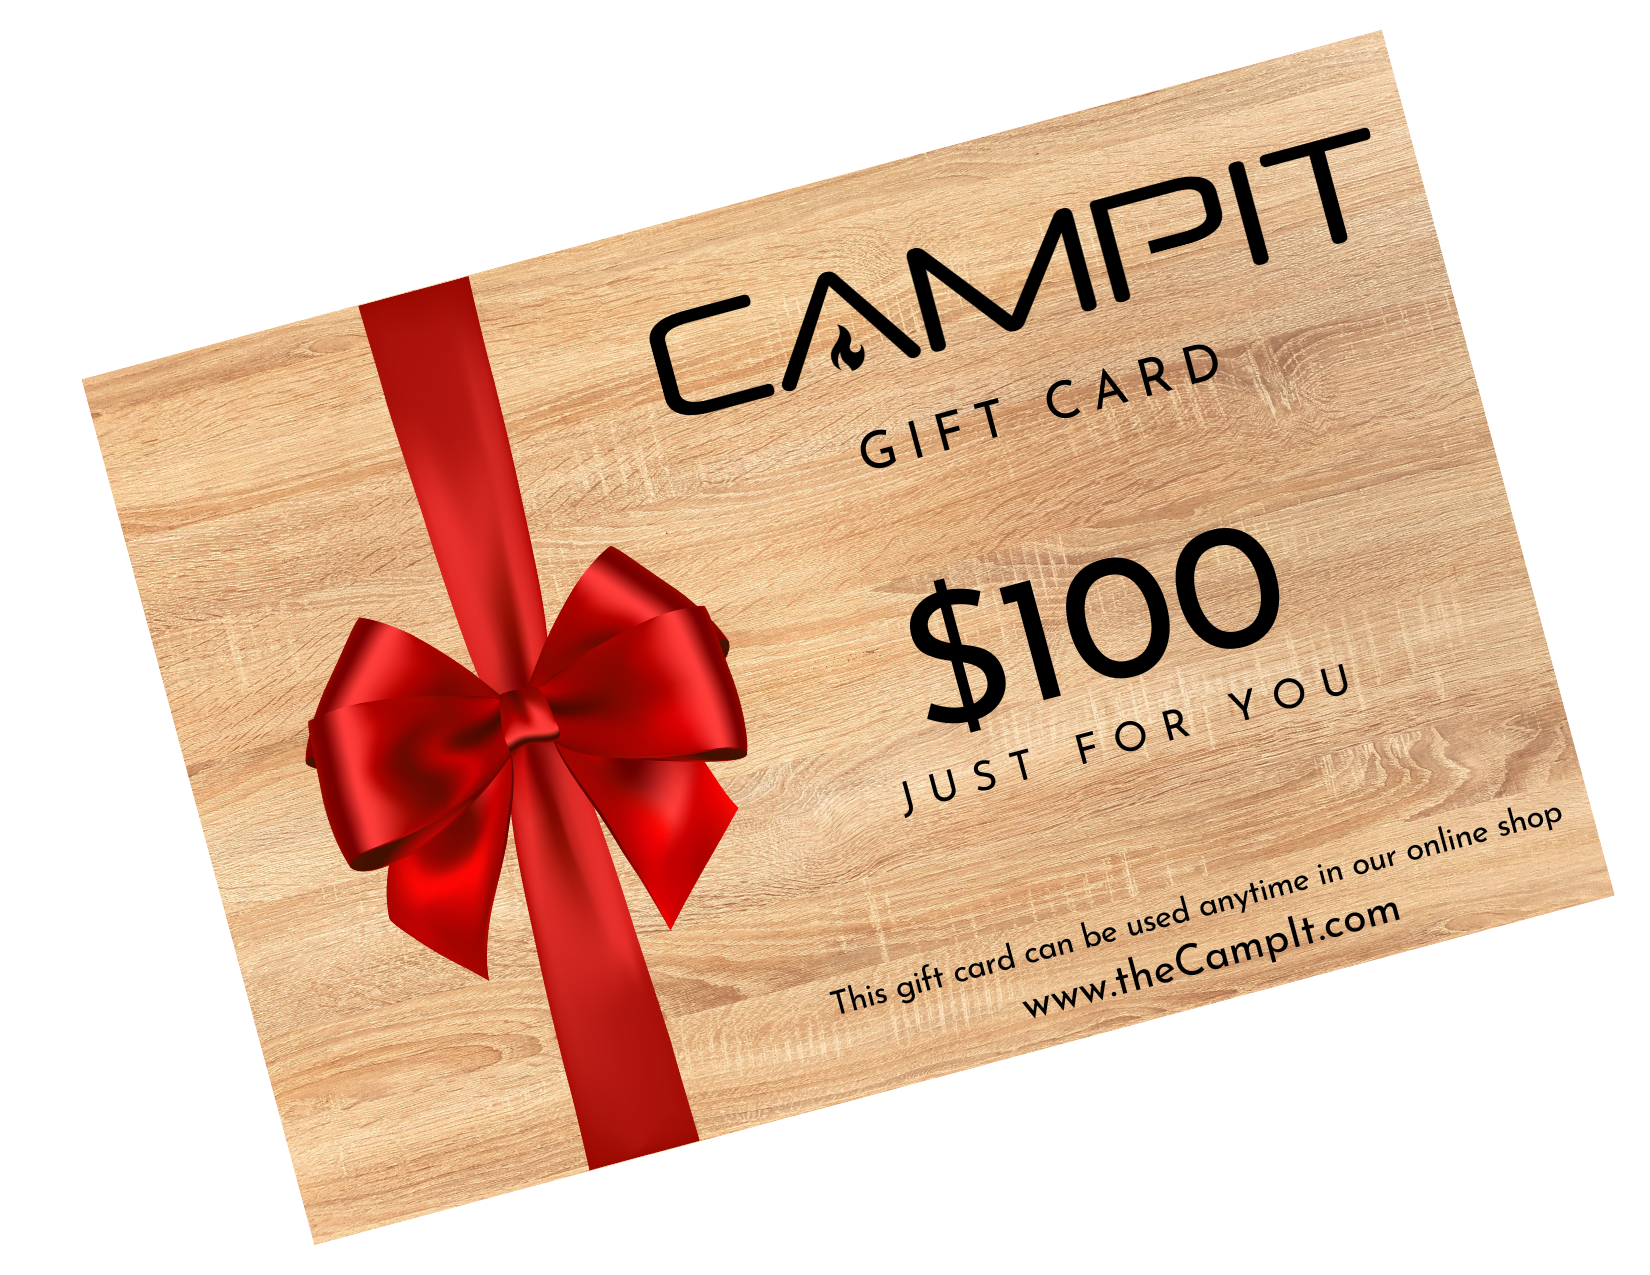 CampIt Gift Card